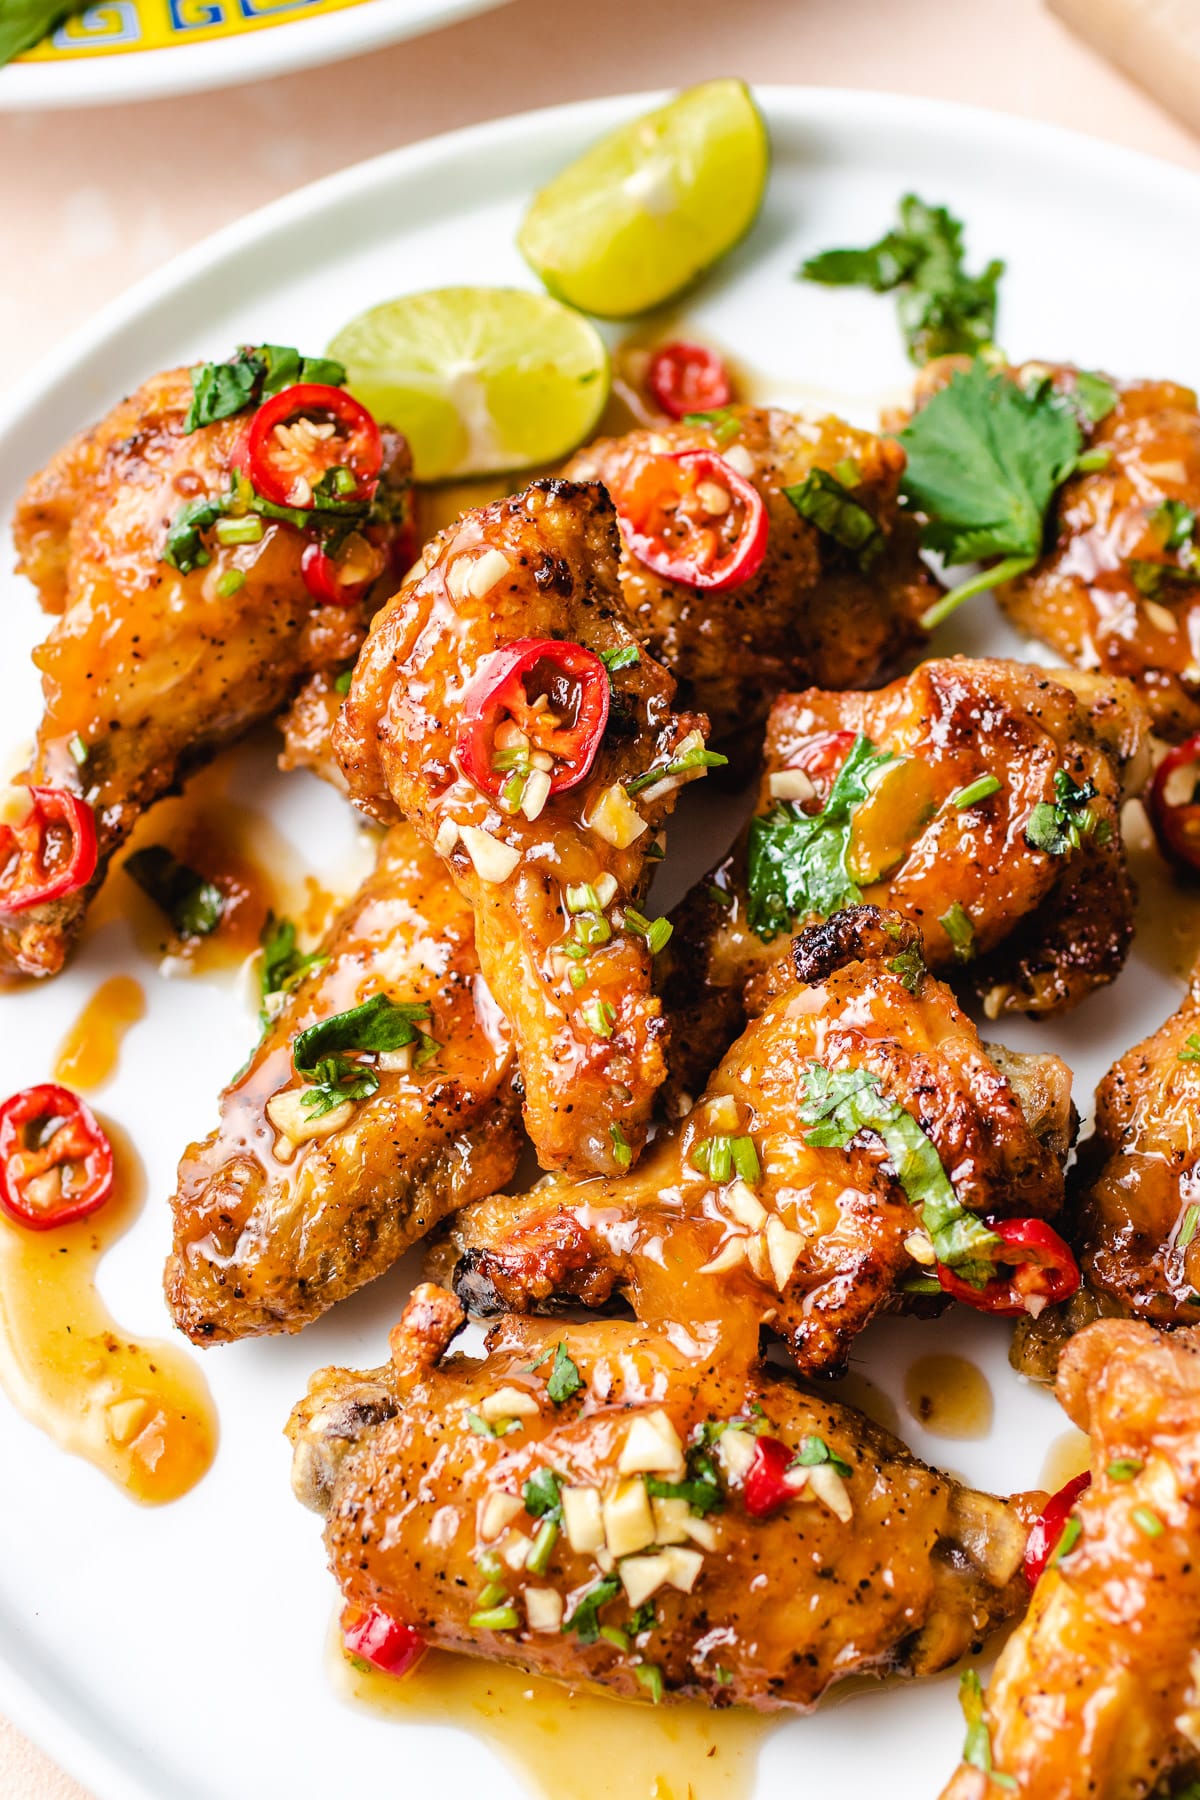 A side shot shows crispy air fryer Vietnamese fish sauce chicken wings with garlic bits and chili pepper on a white plate.